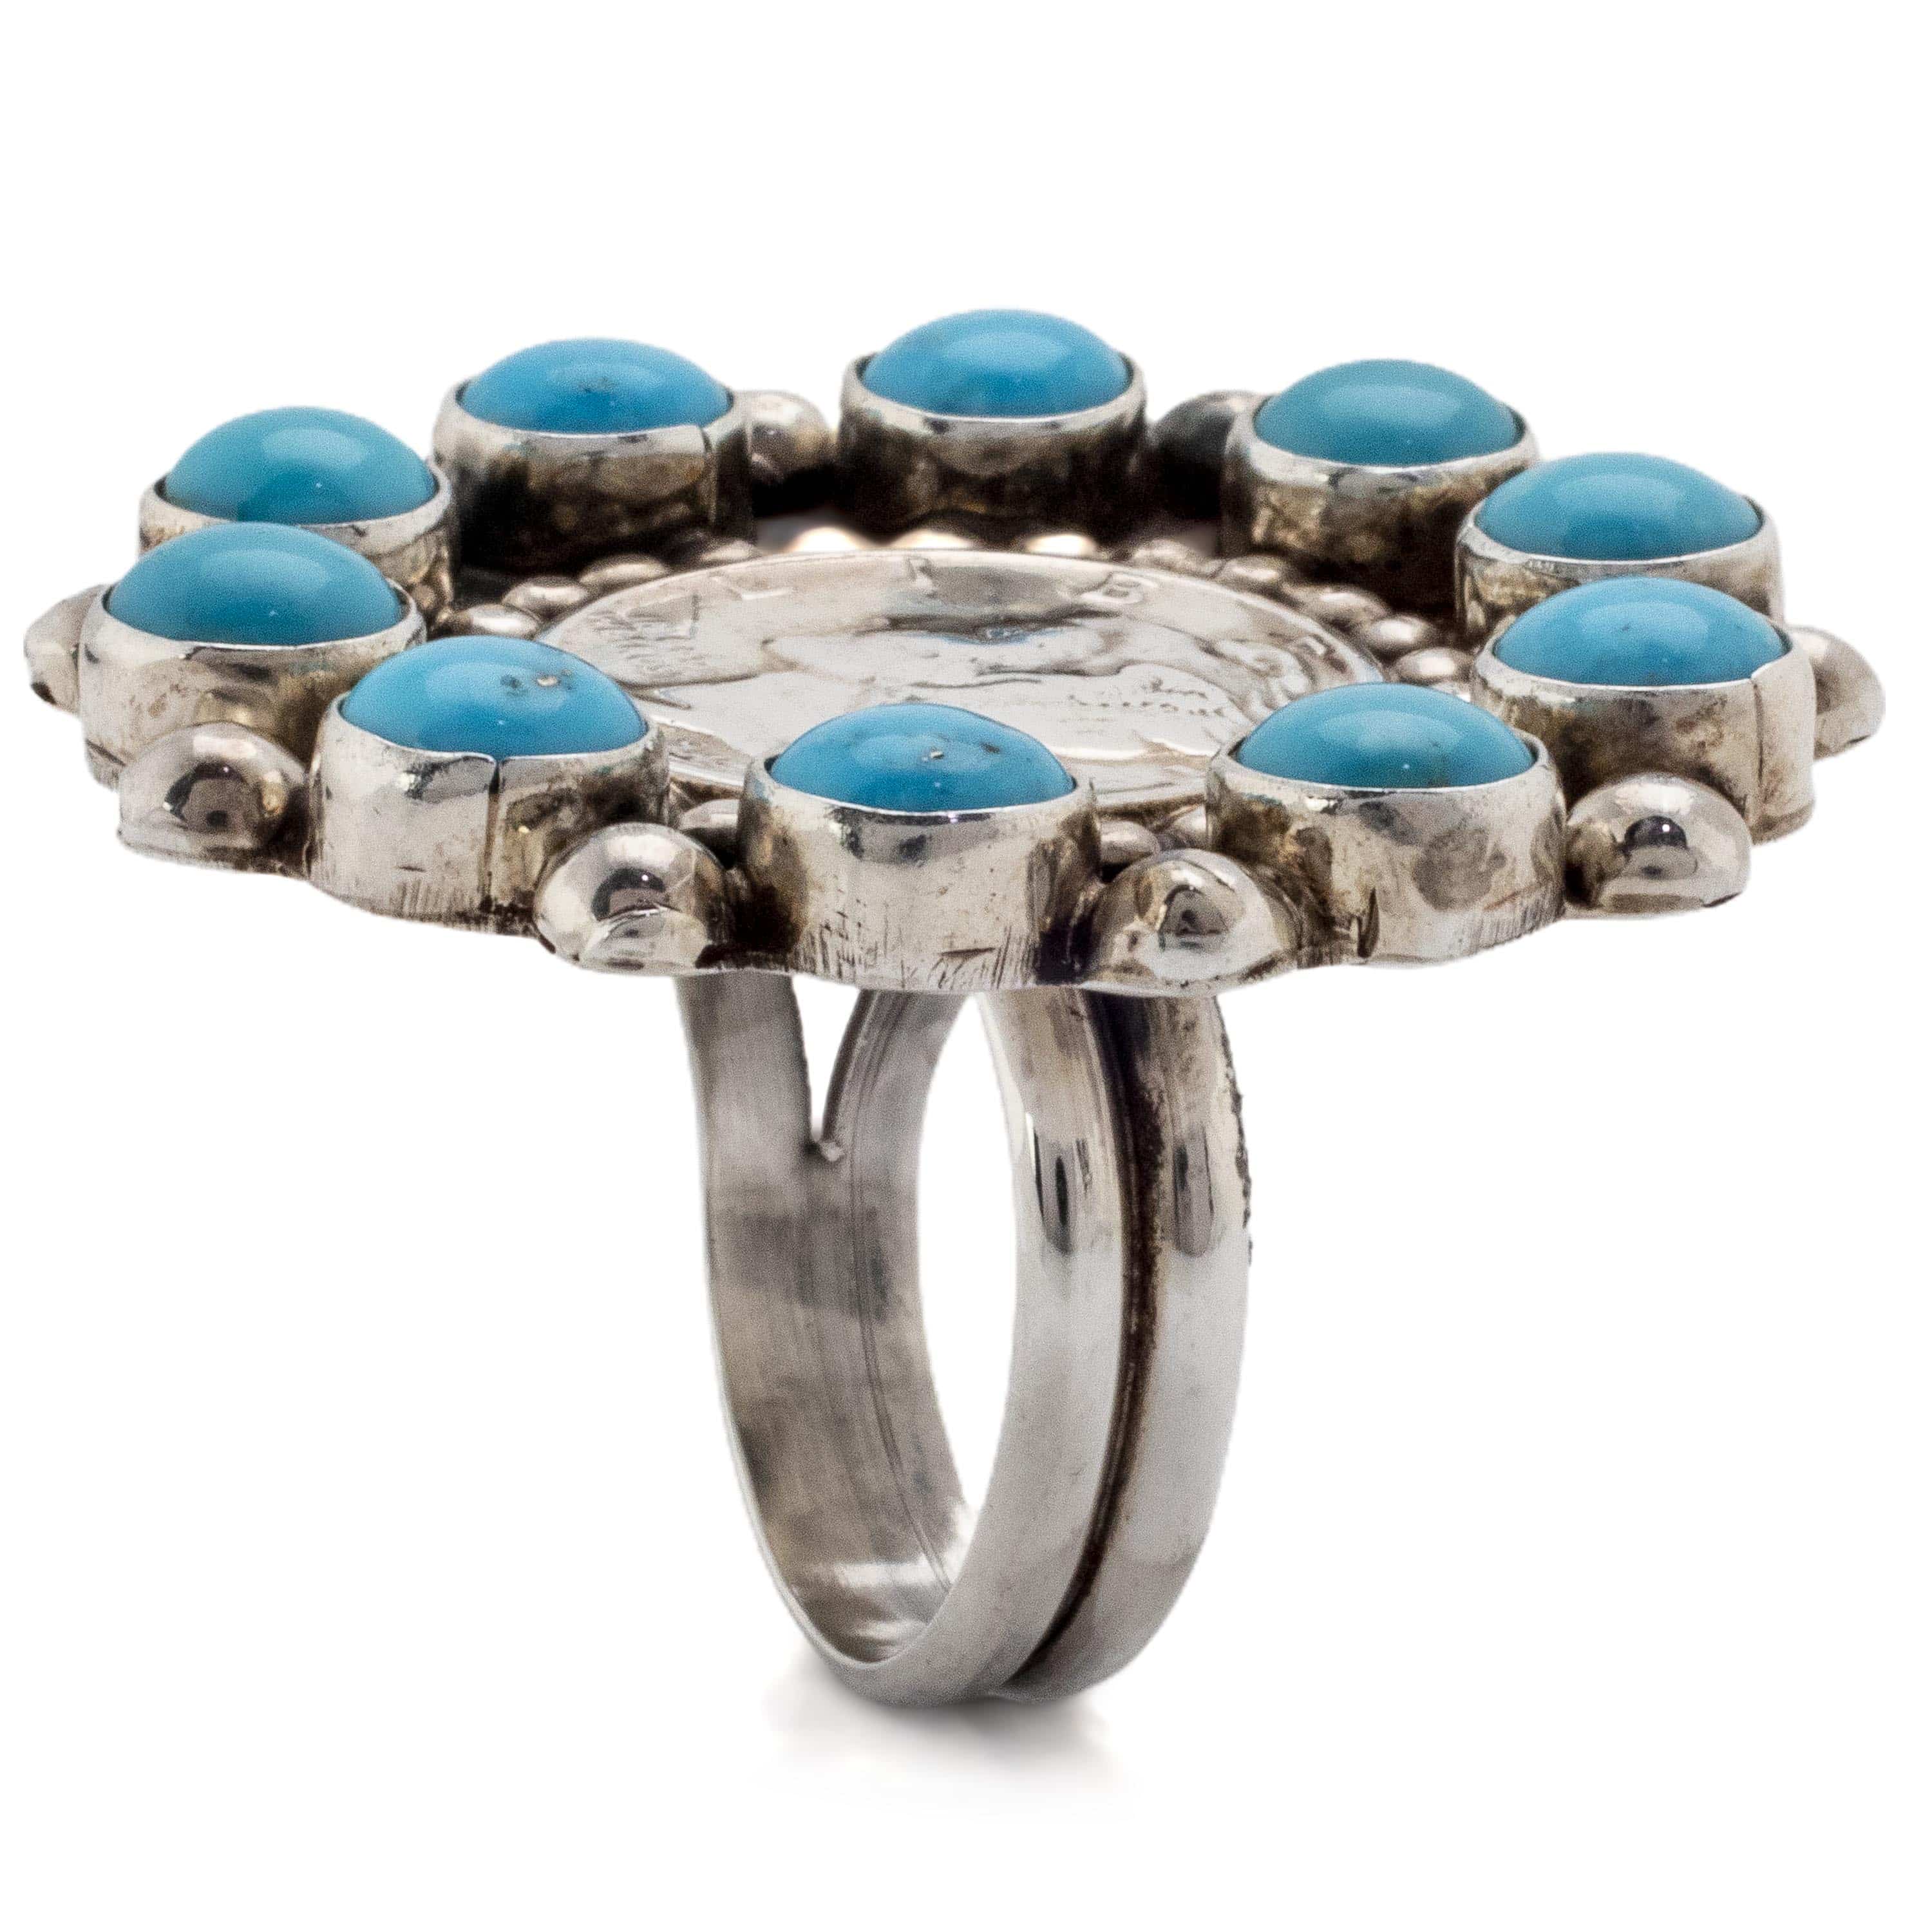 Kalifano Native American Jewelry 8 Kingman Turquoise Liberty Coin USA Native American Made 925 Sterling Silver Adaptive Ring NAR1200.034.8